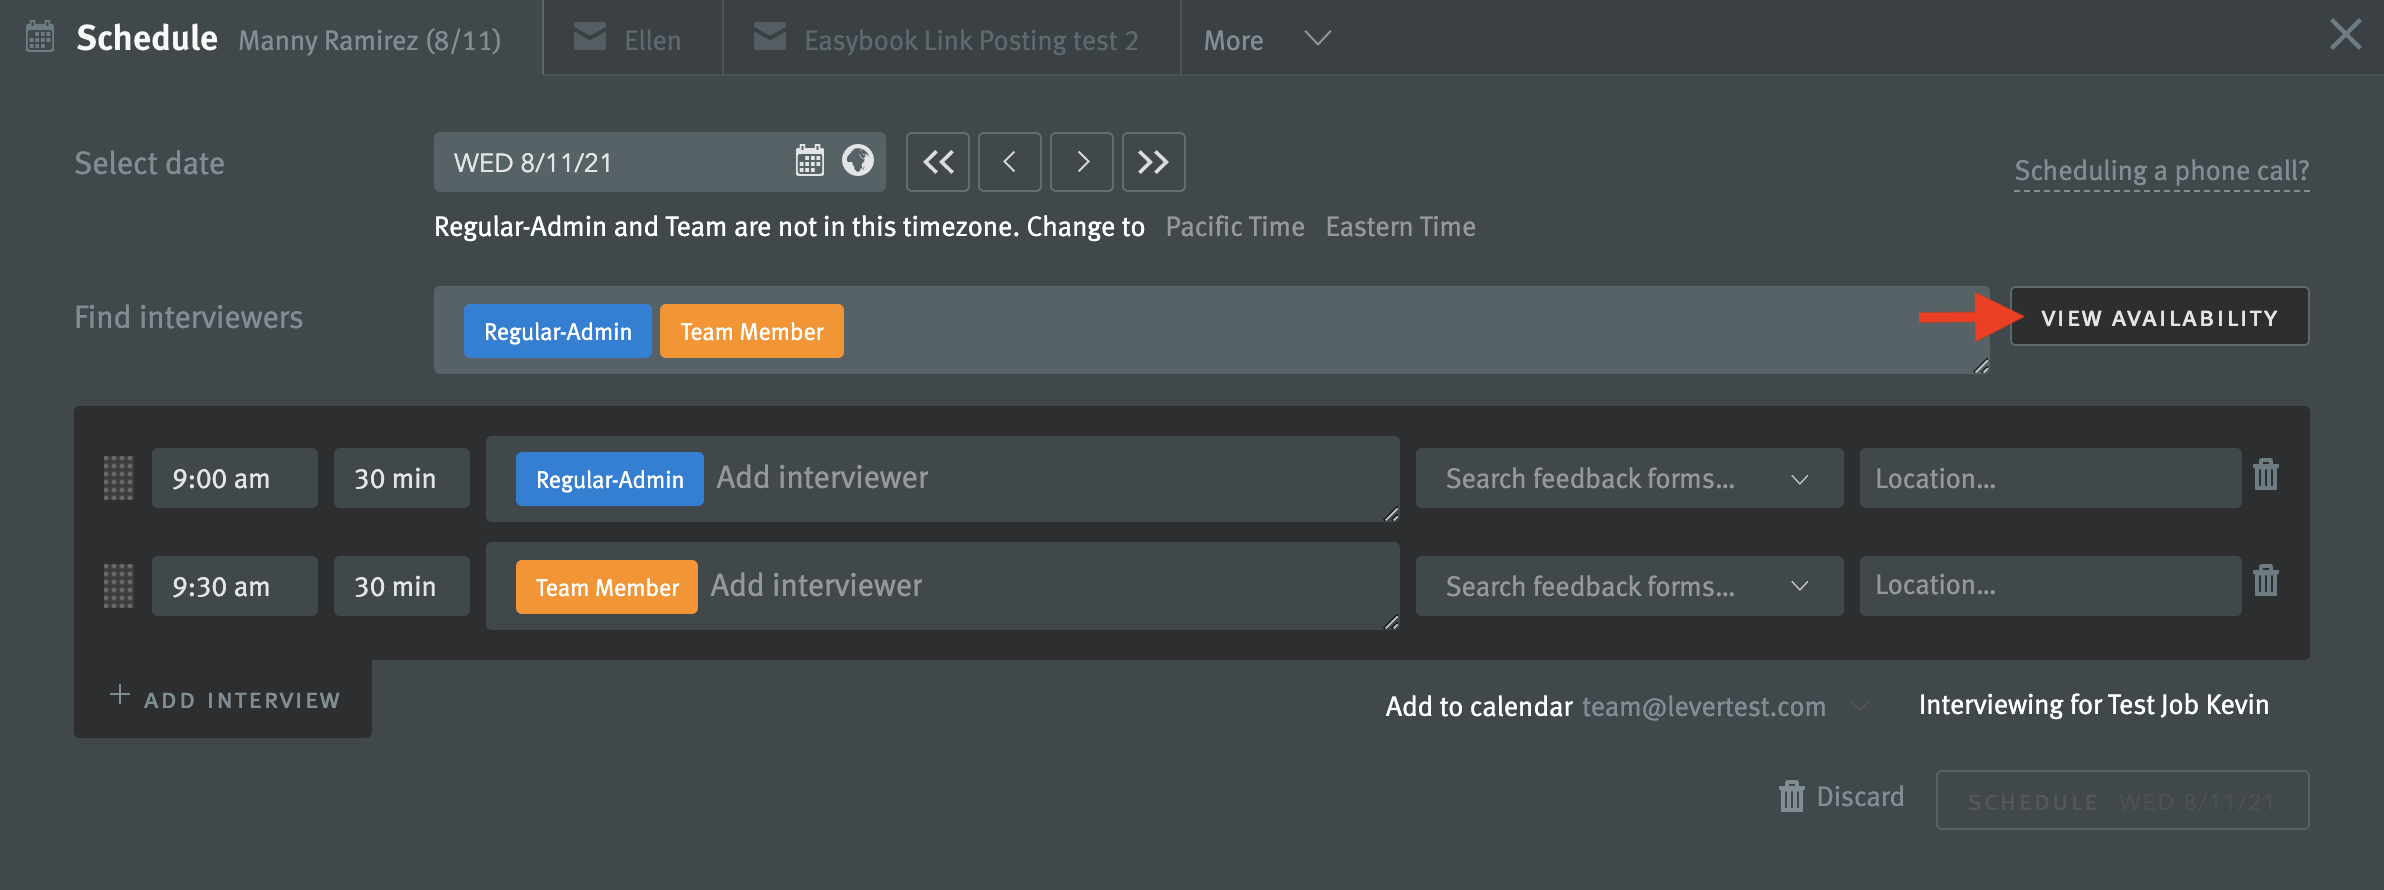 Scheduling window with two interviewers selected and arrow pointing to View Availability button to right of interviewer field.